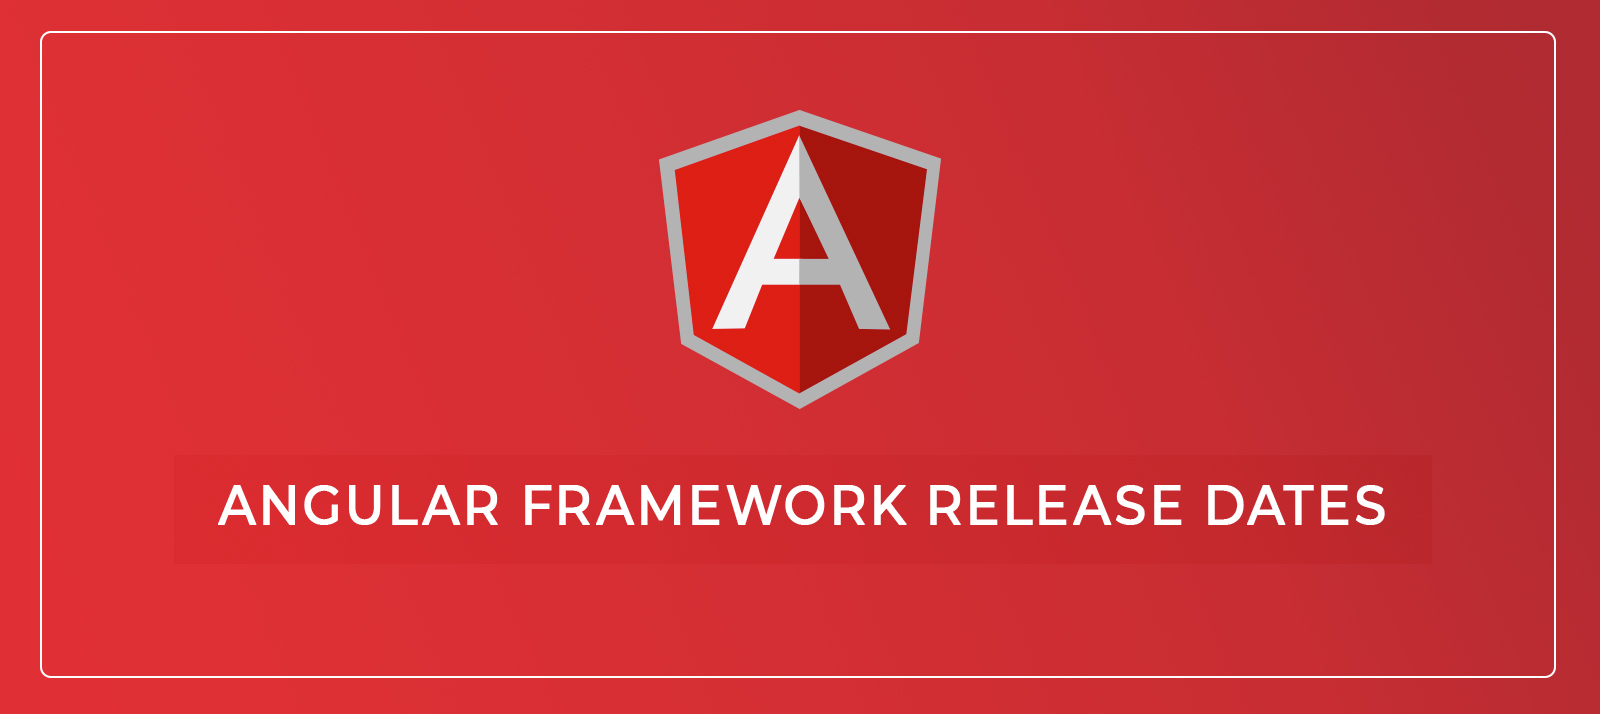 angular versions in service now